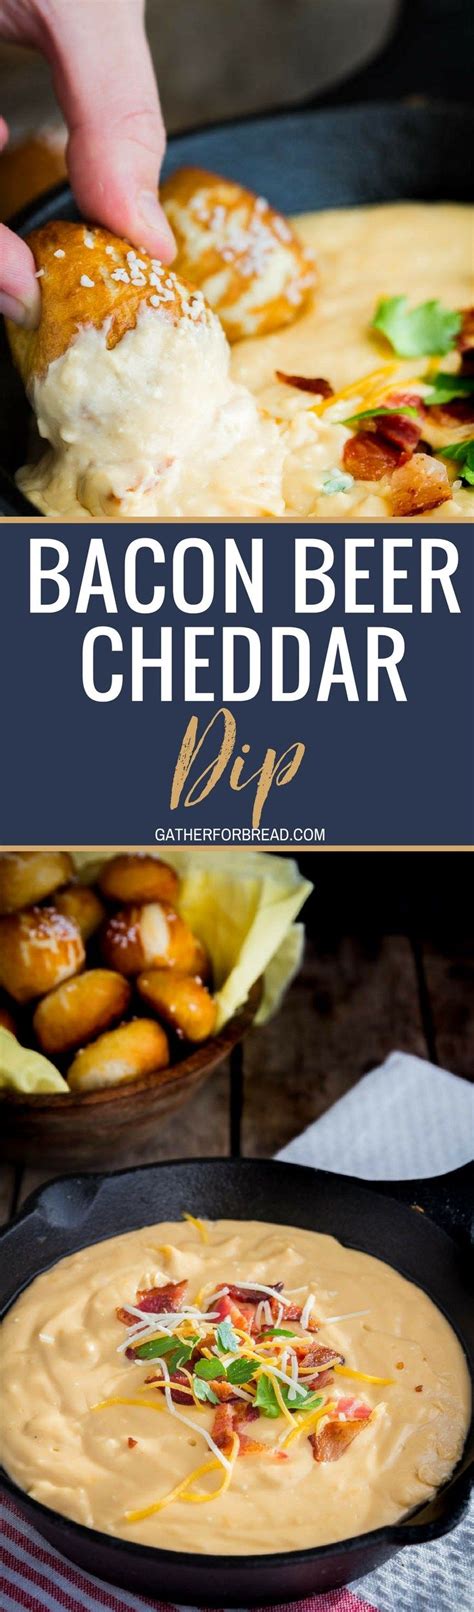 Bacon Beer Cheddar Dip Hot Cheesy Cheddar Dip Made With Beer Is Great